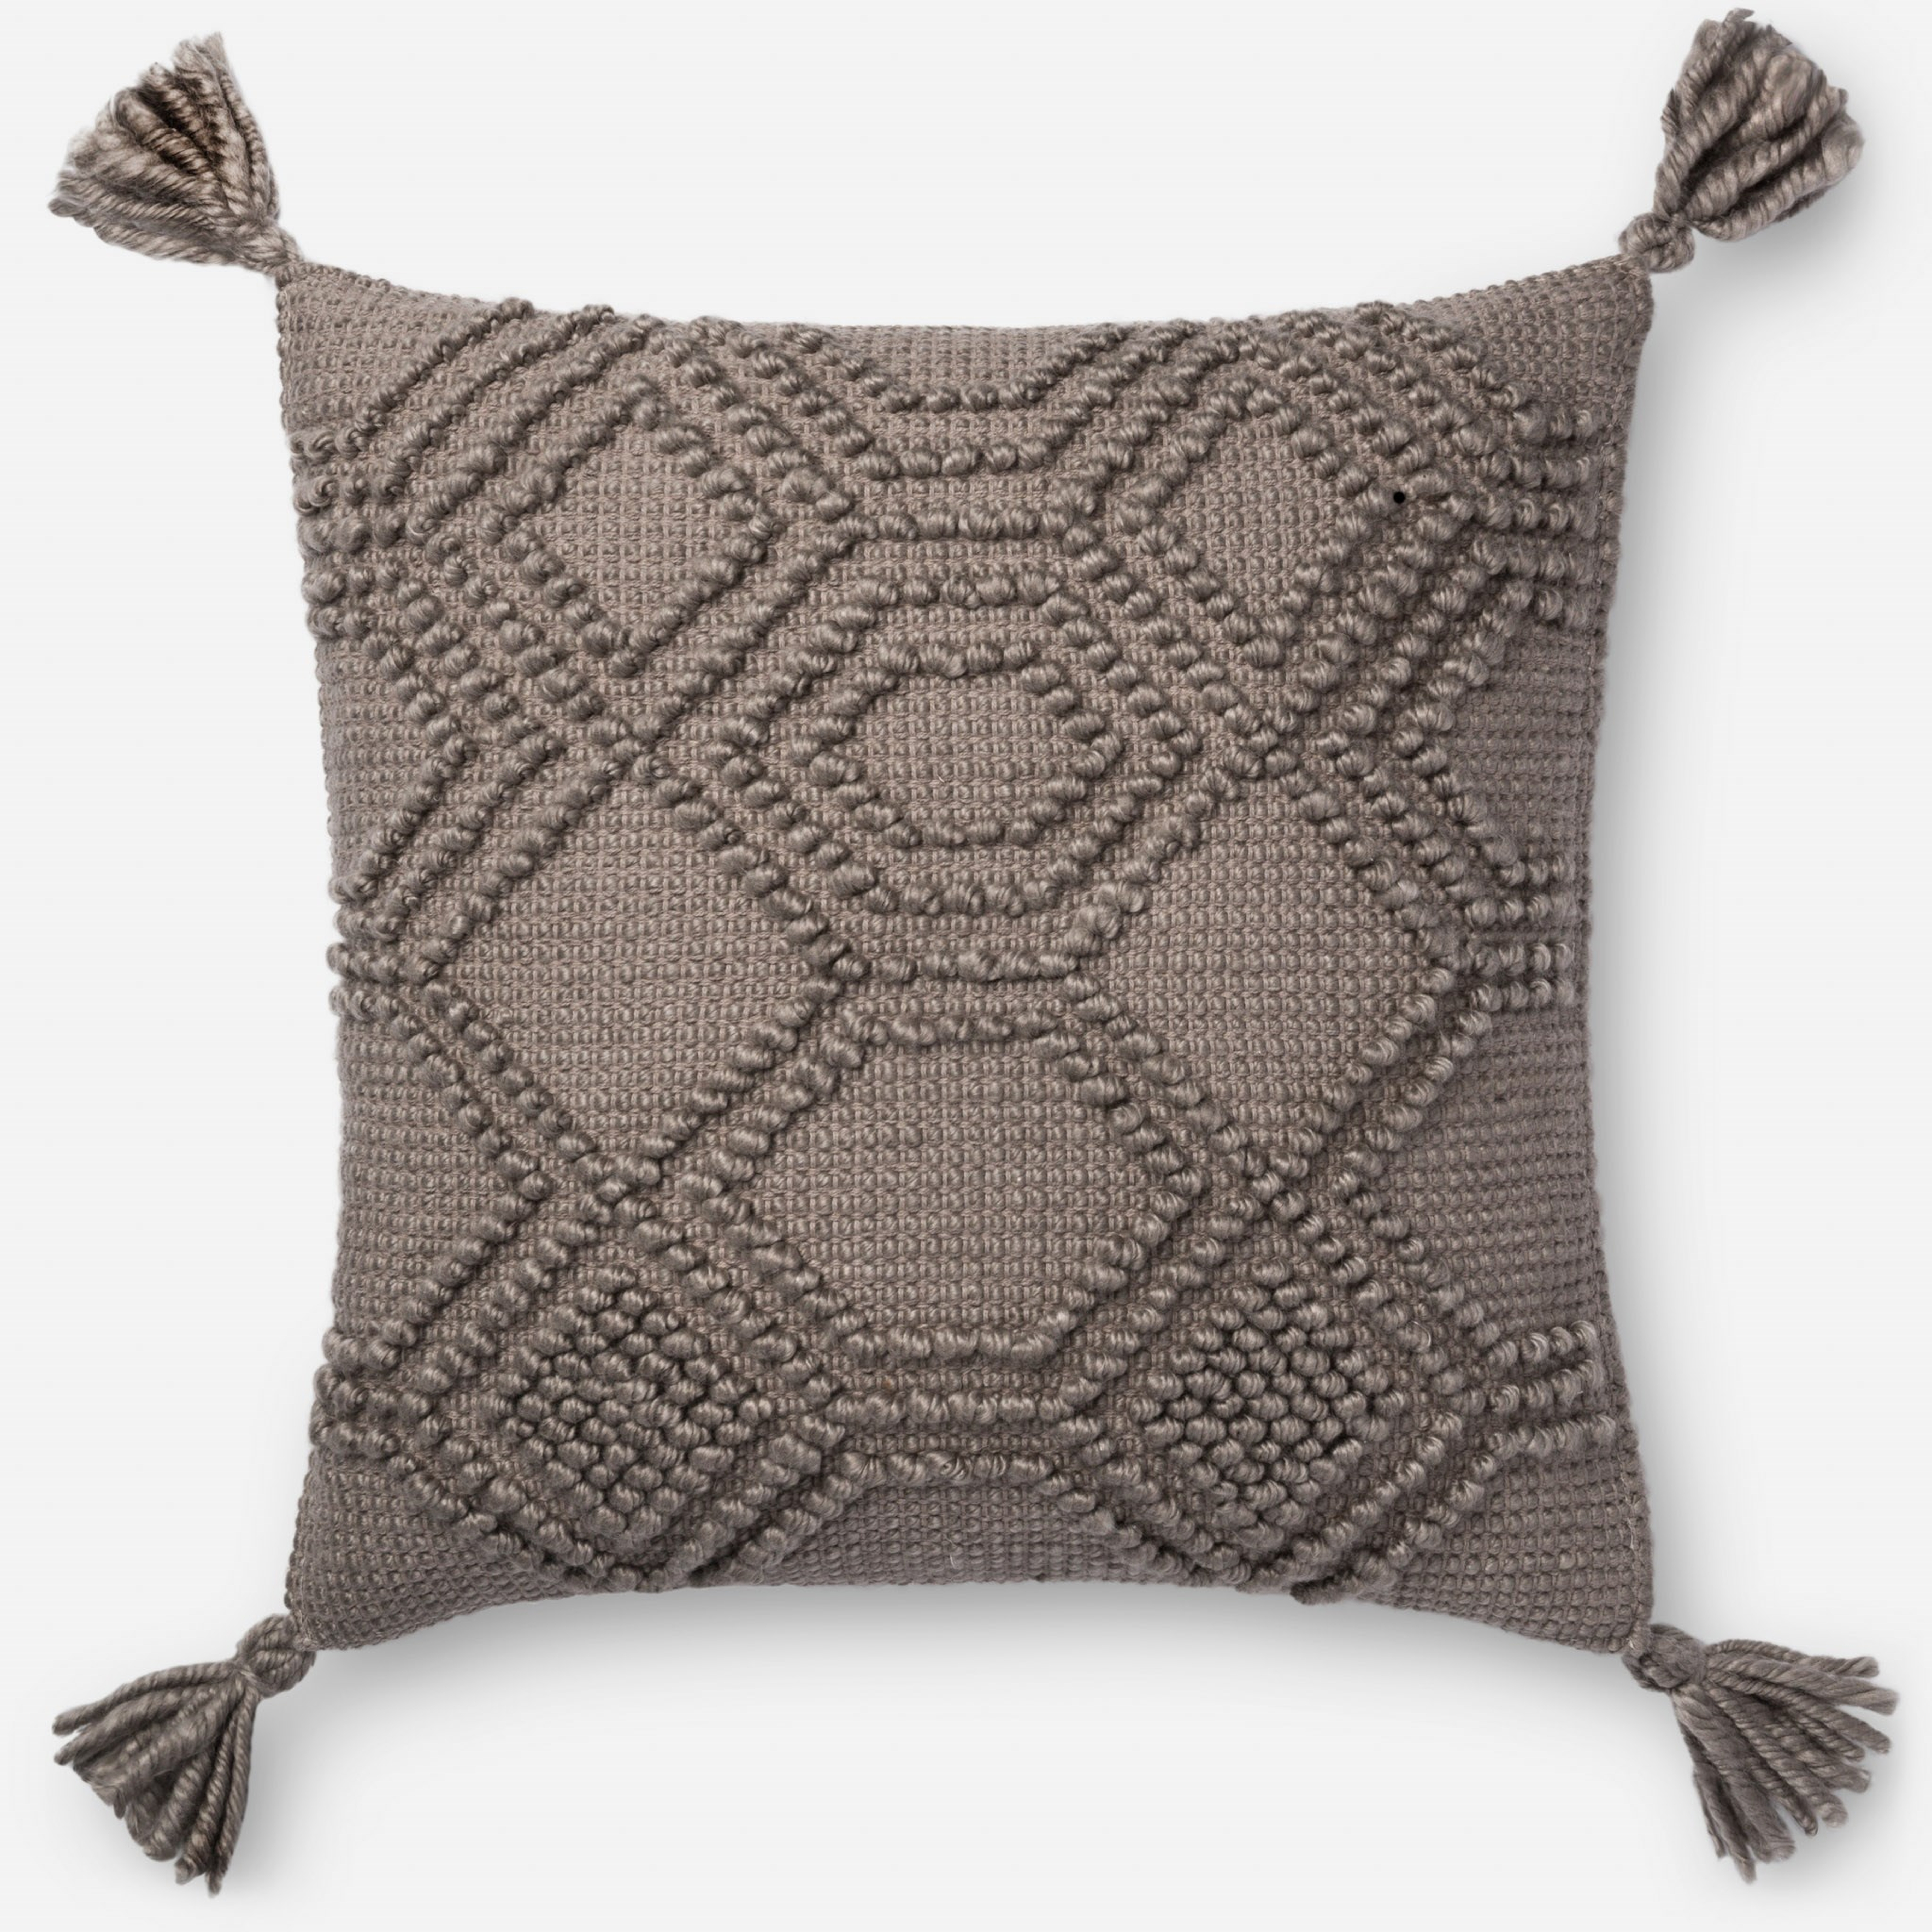 PILLOWS - GREY - Magnolia Home by Joana Gaines Crafted by Loloi Rugs